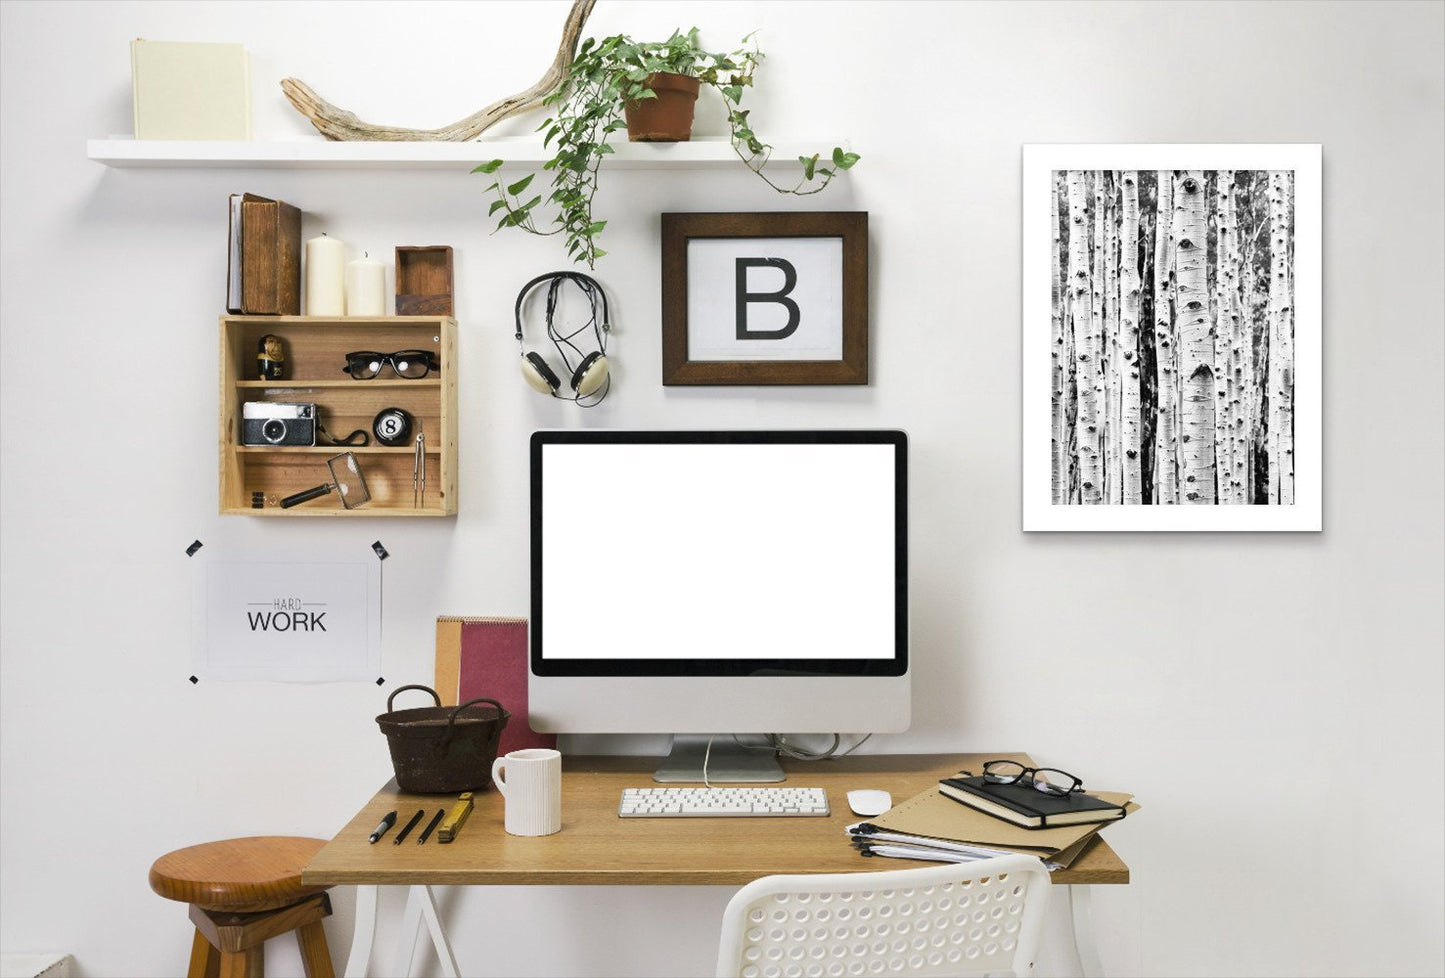 Birch By Sisi And Seb - White Framed Print - Wall Art - Americanflat